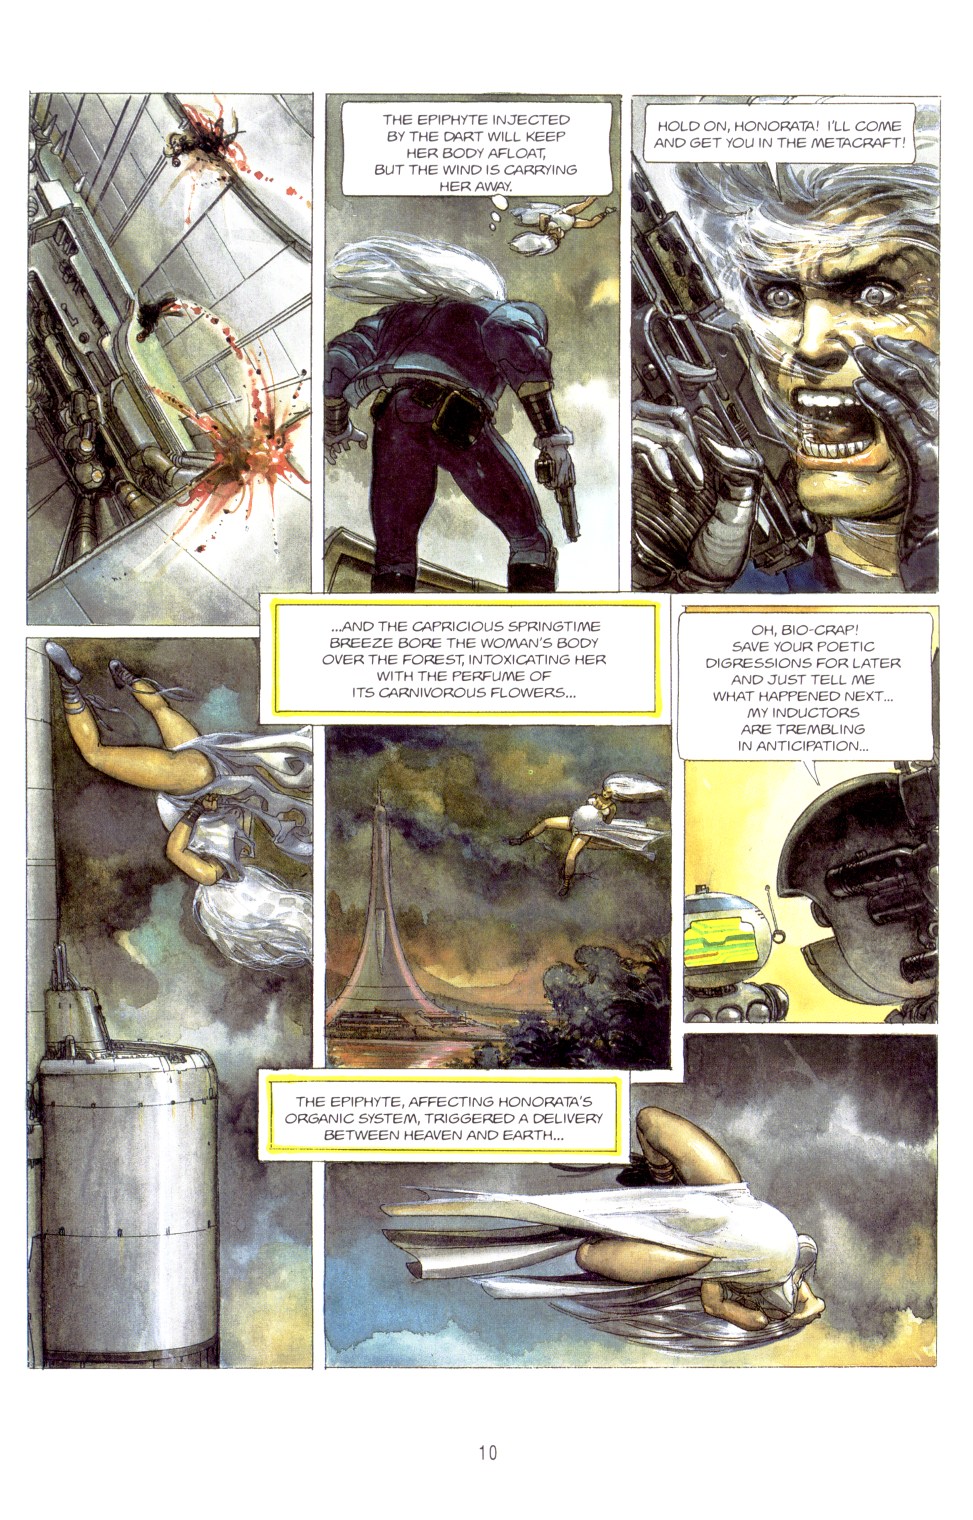 Read online The Metabarons comic -  Issue #4 - Honorata The Sorceres - 12